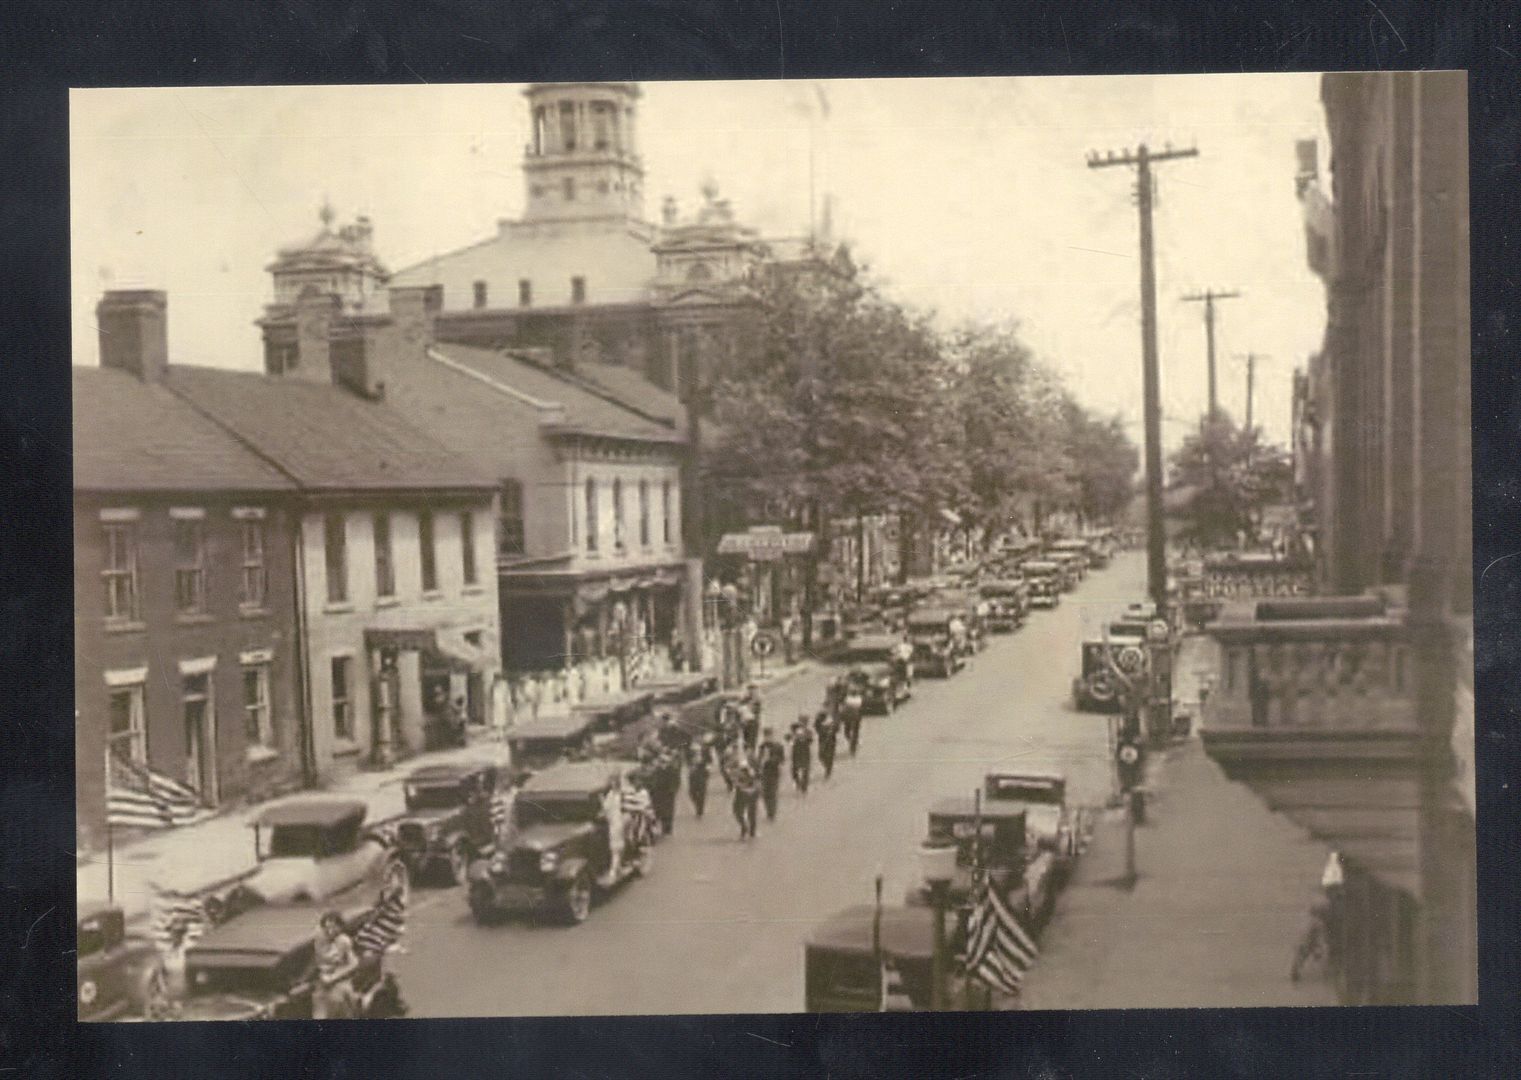 REAL PHOTO ST. CLAIRSVILLE OHIO DOWNTOWN STREET SCENE PARADE POSTCARD COPY